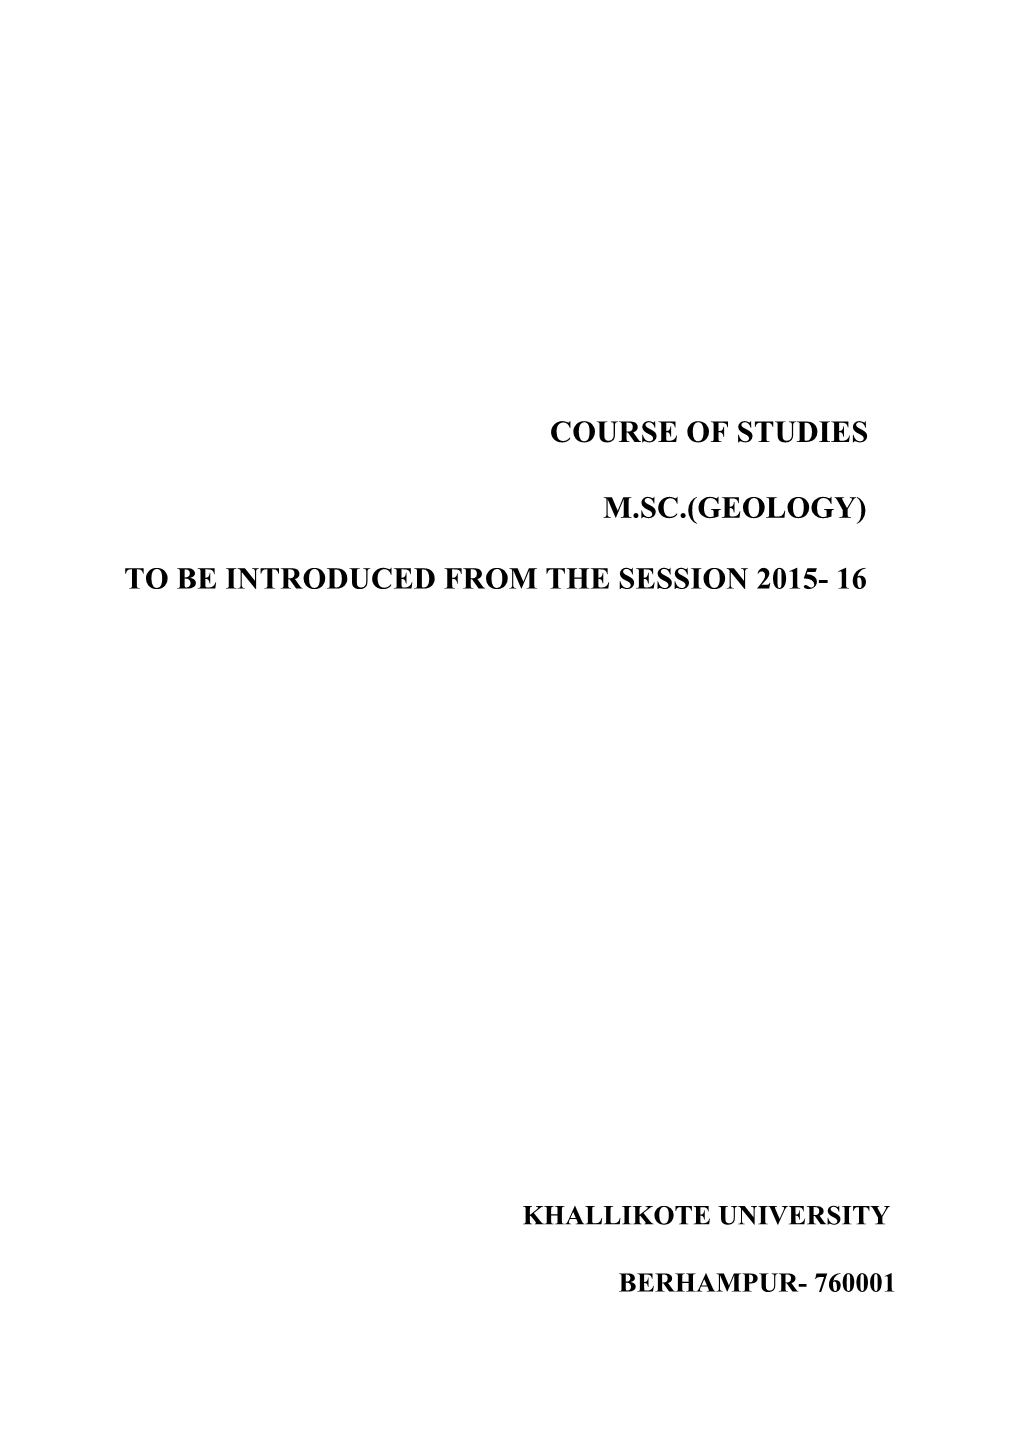 To Be Introduced from the Session 2015- 16